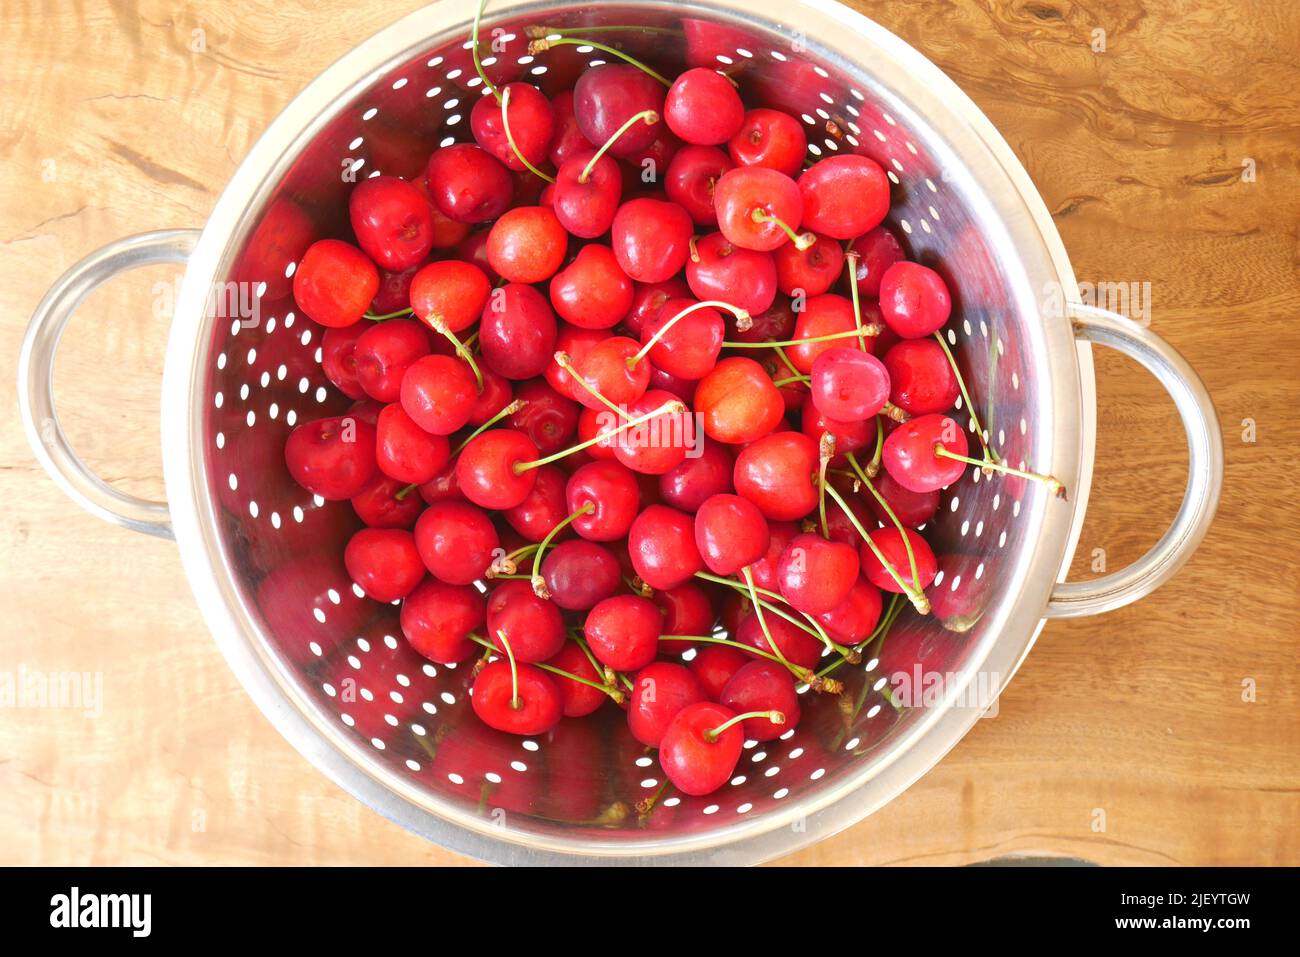 Fresh red cherries in a colander on a table, Hungary Stock Photo